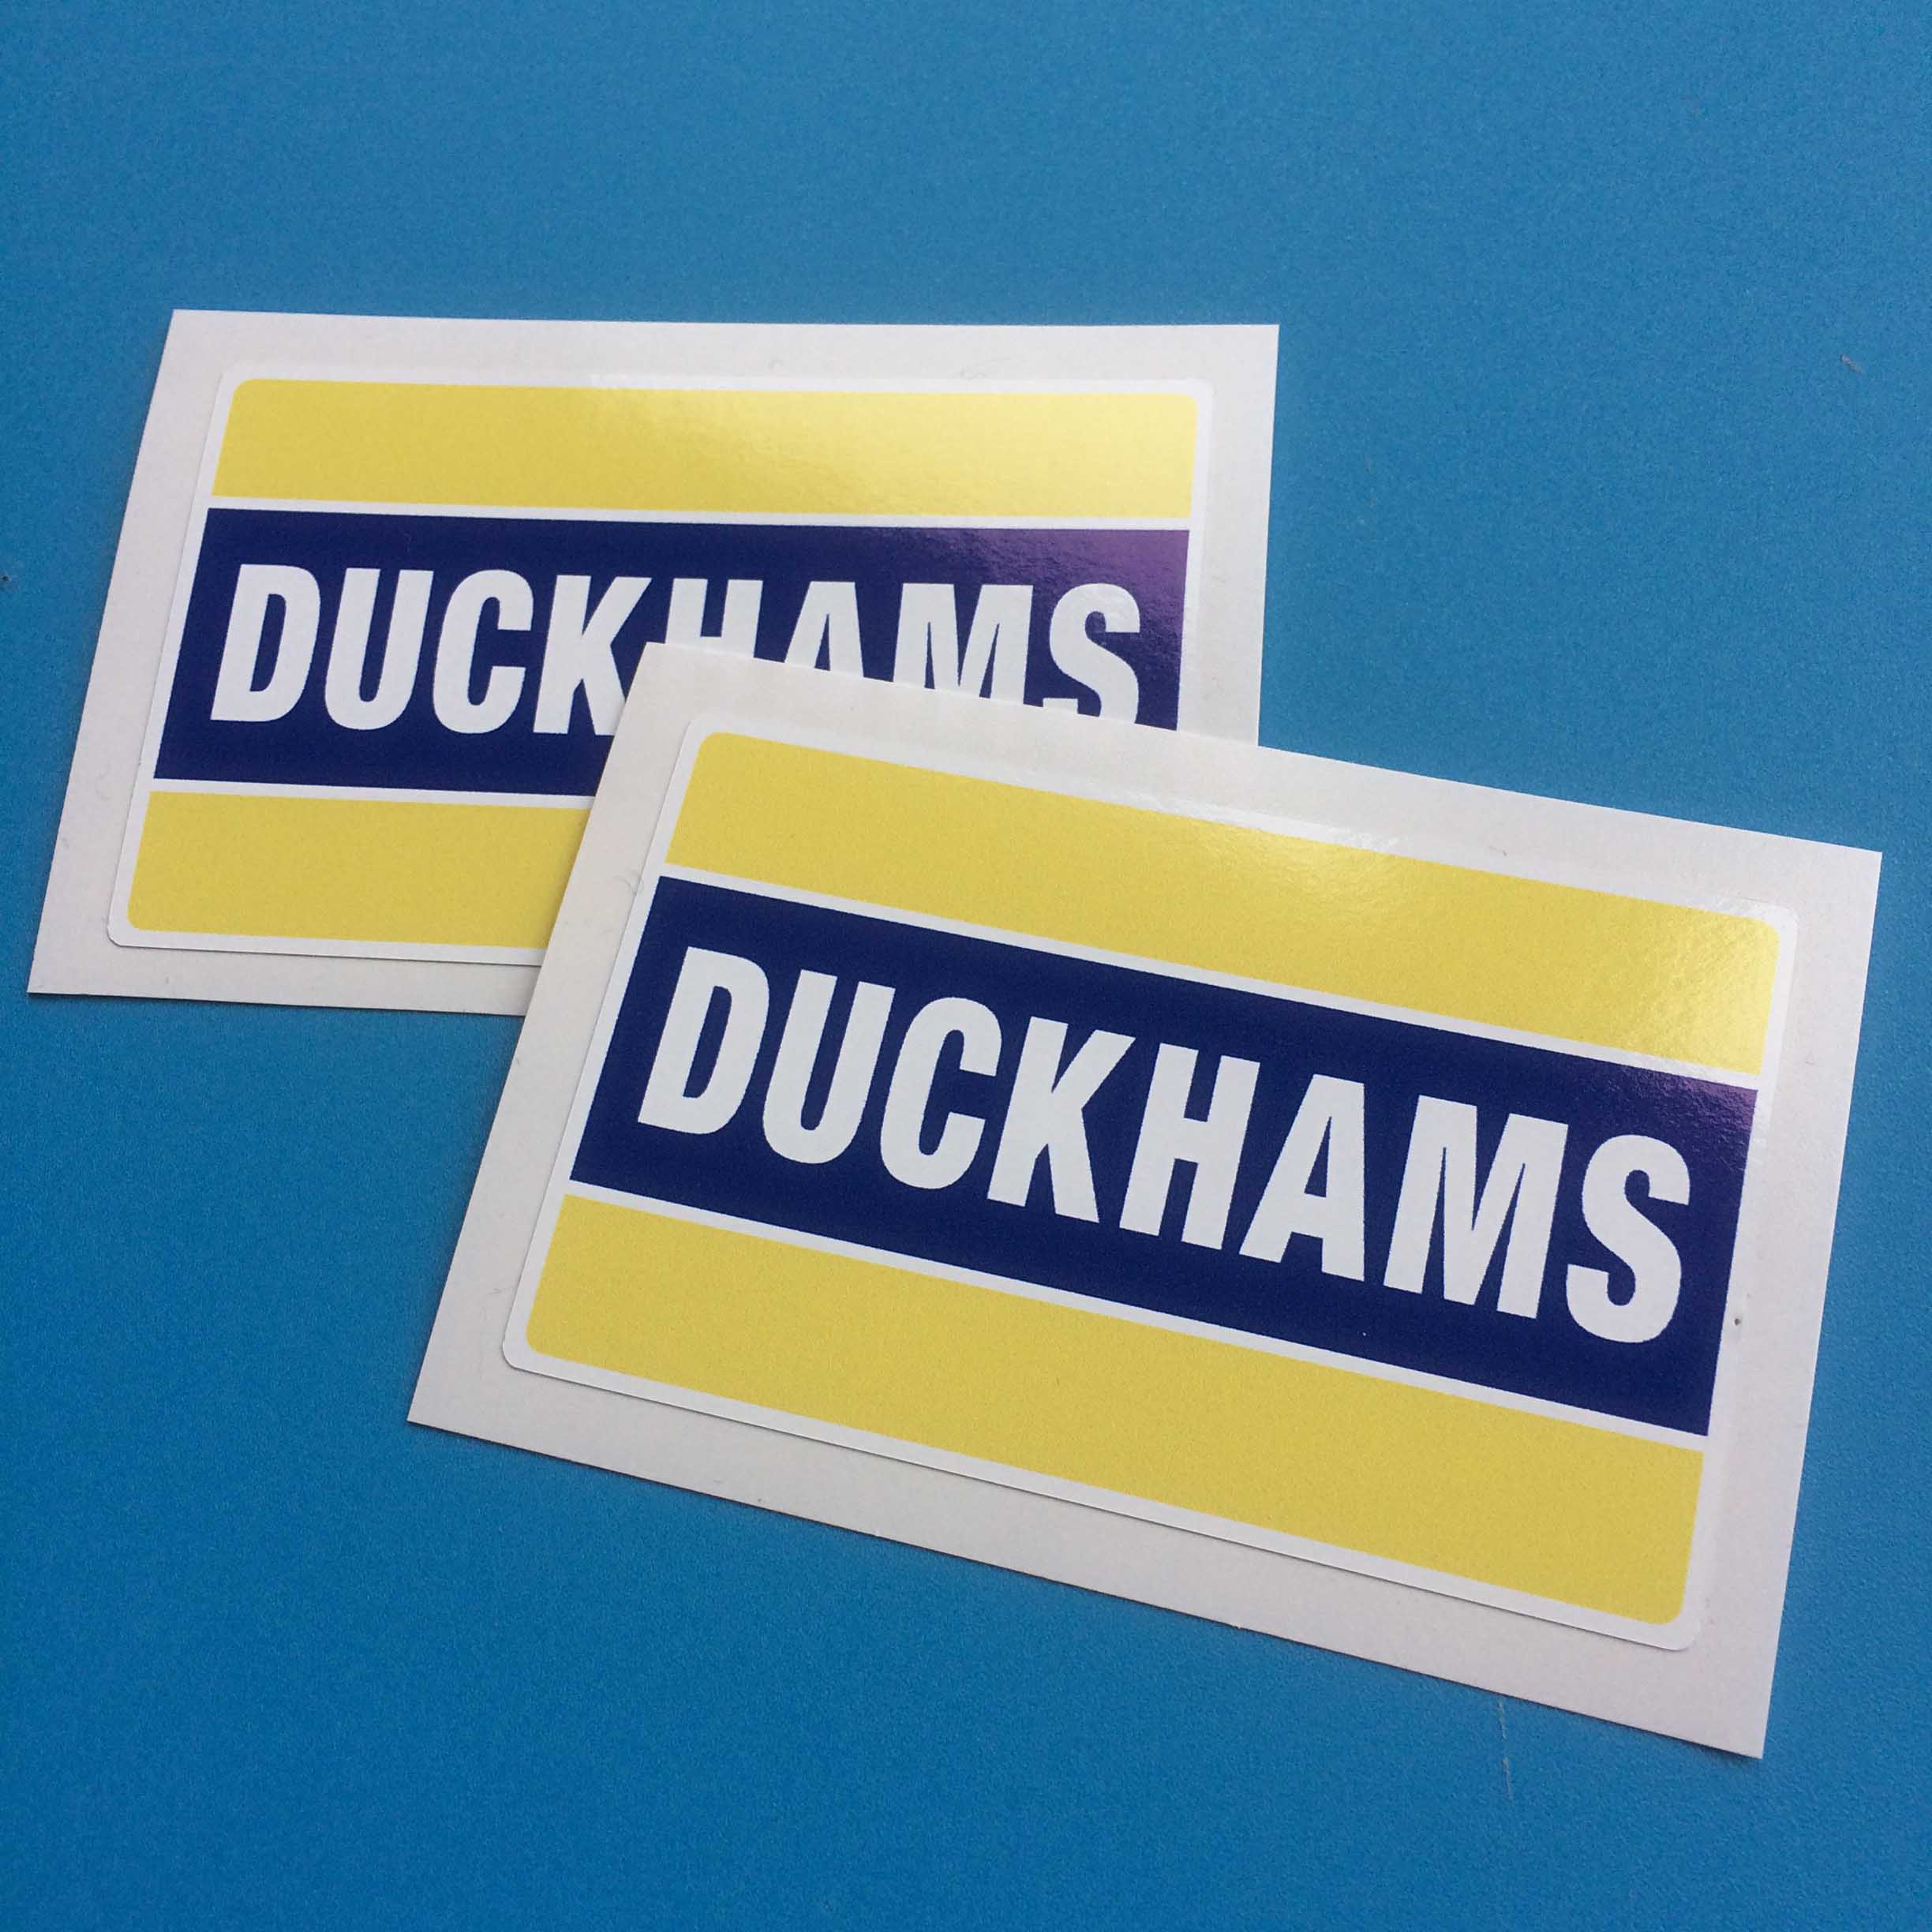 DUCKHAMS MOTOR OIL STICKERS. Duckhams in white capital letters on blue across the centre. The area above and below is yellow.